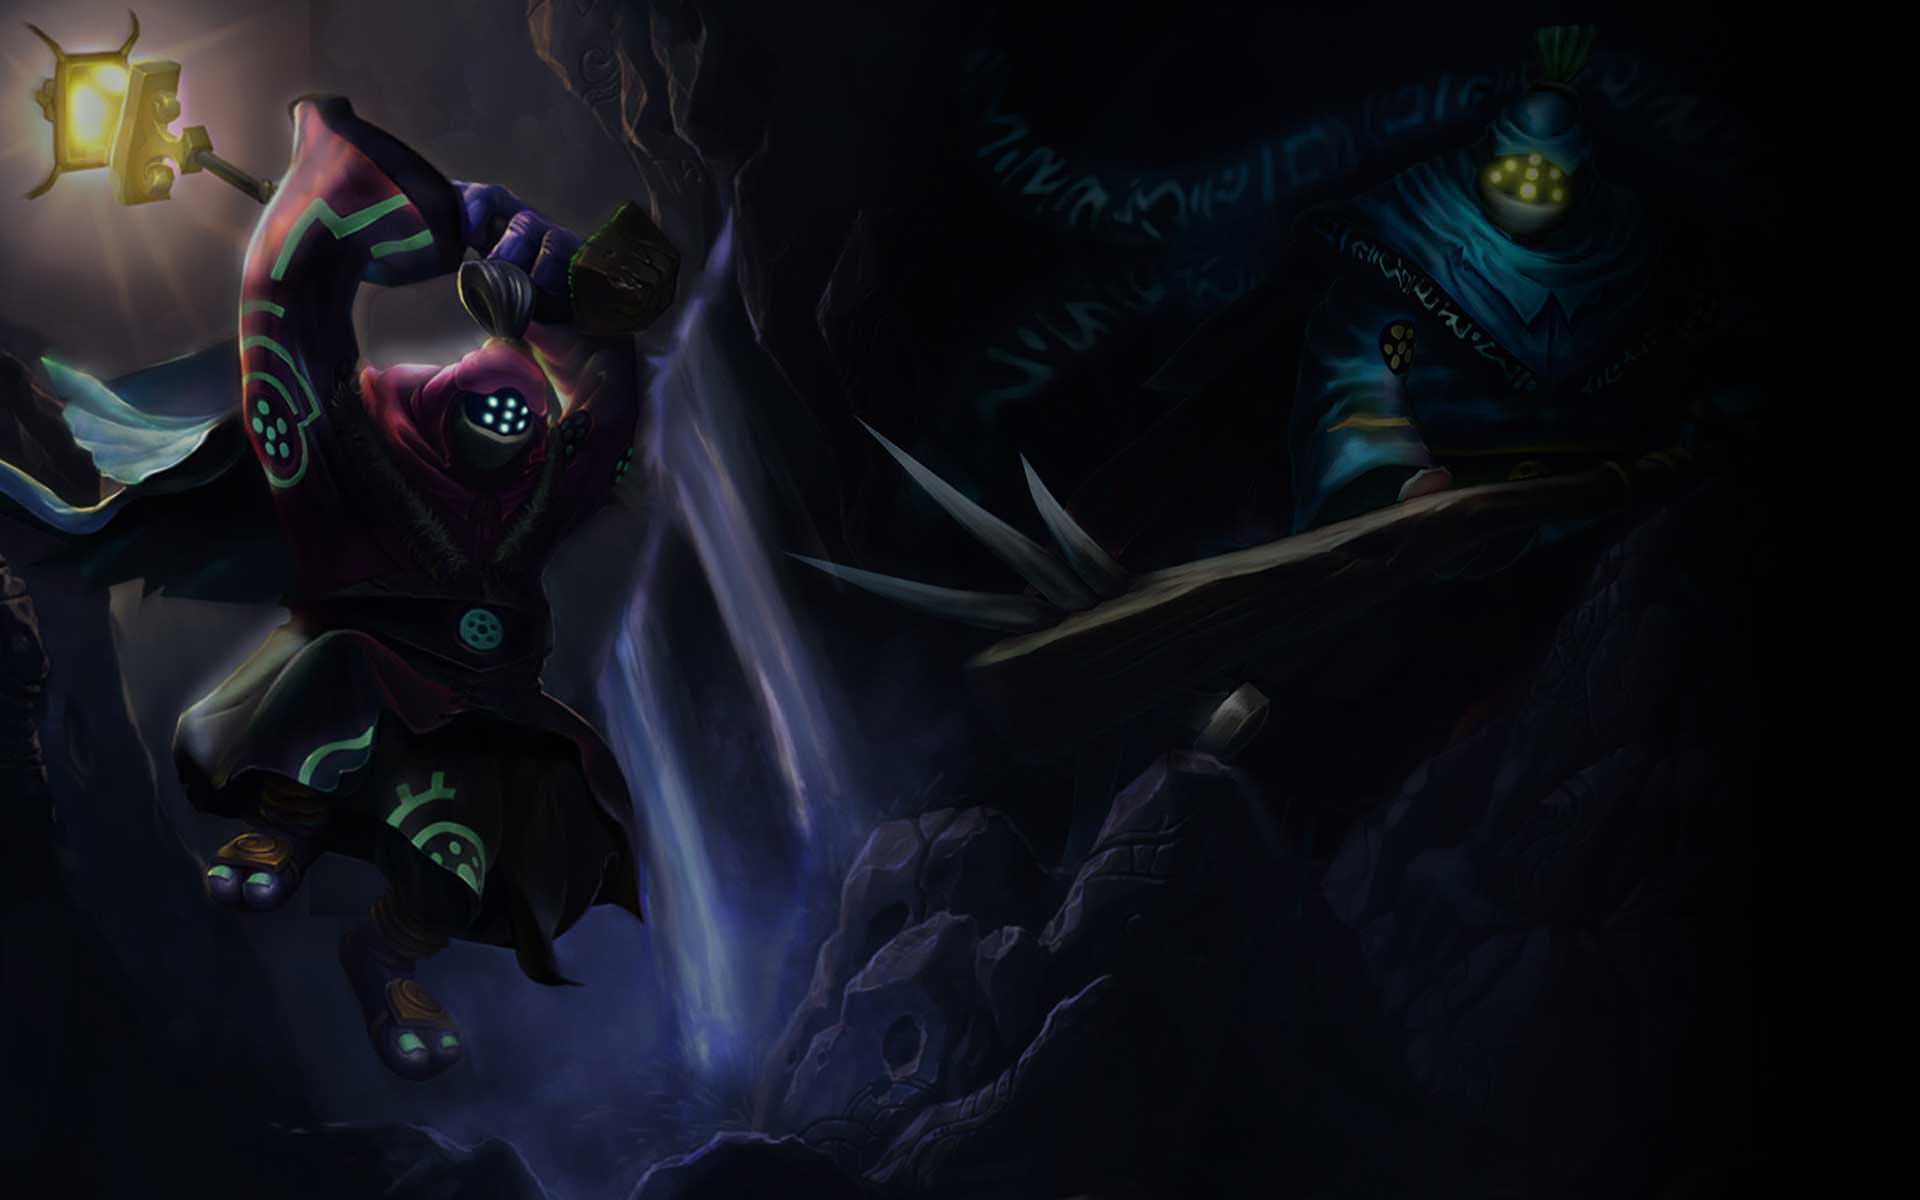 50+ Jax (League Of Legends) HD Wallpapers and Backgrounds